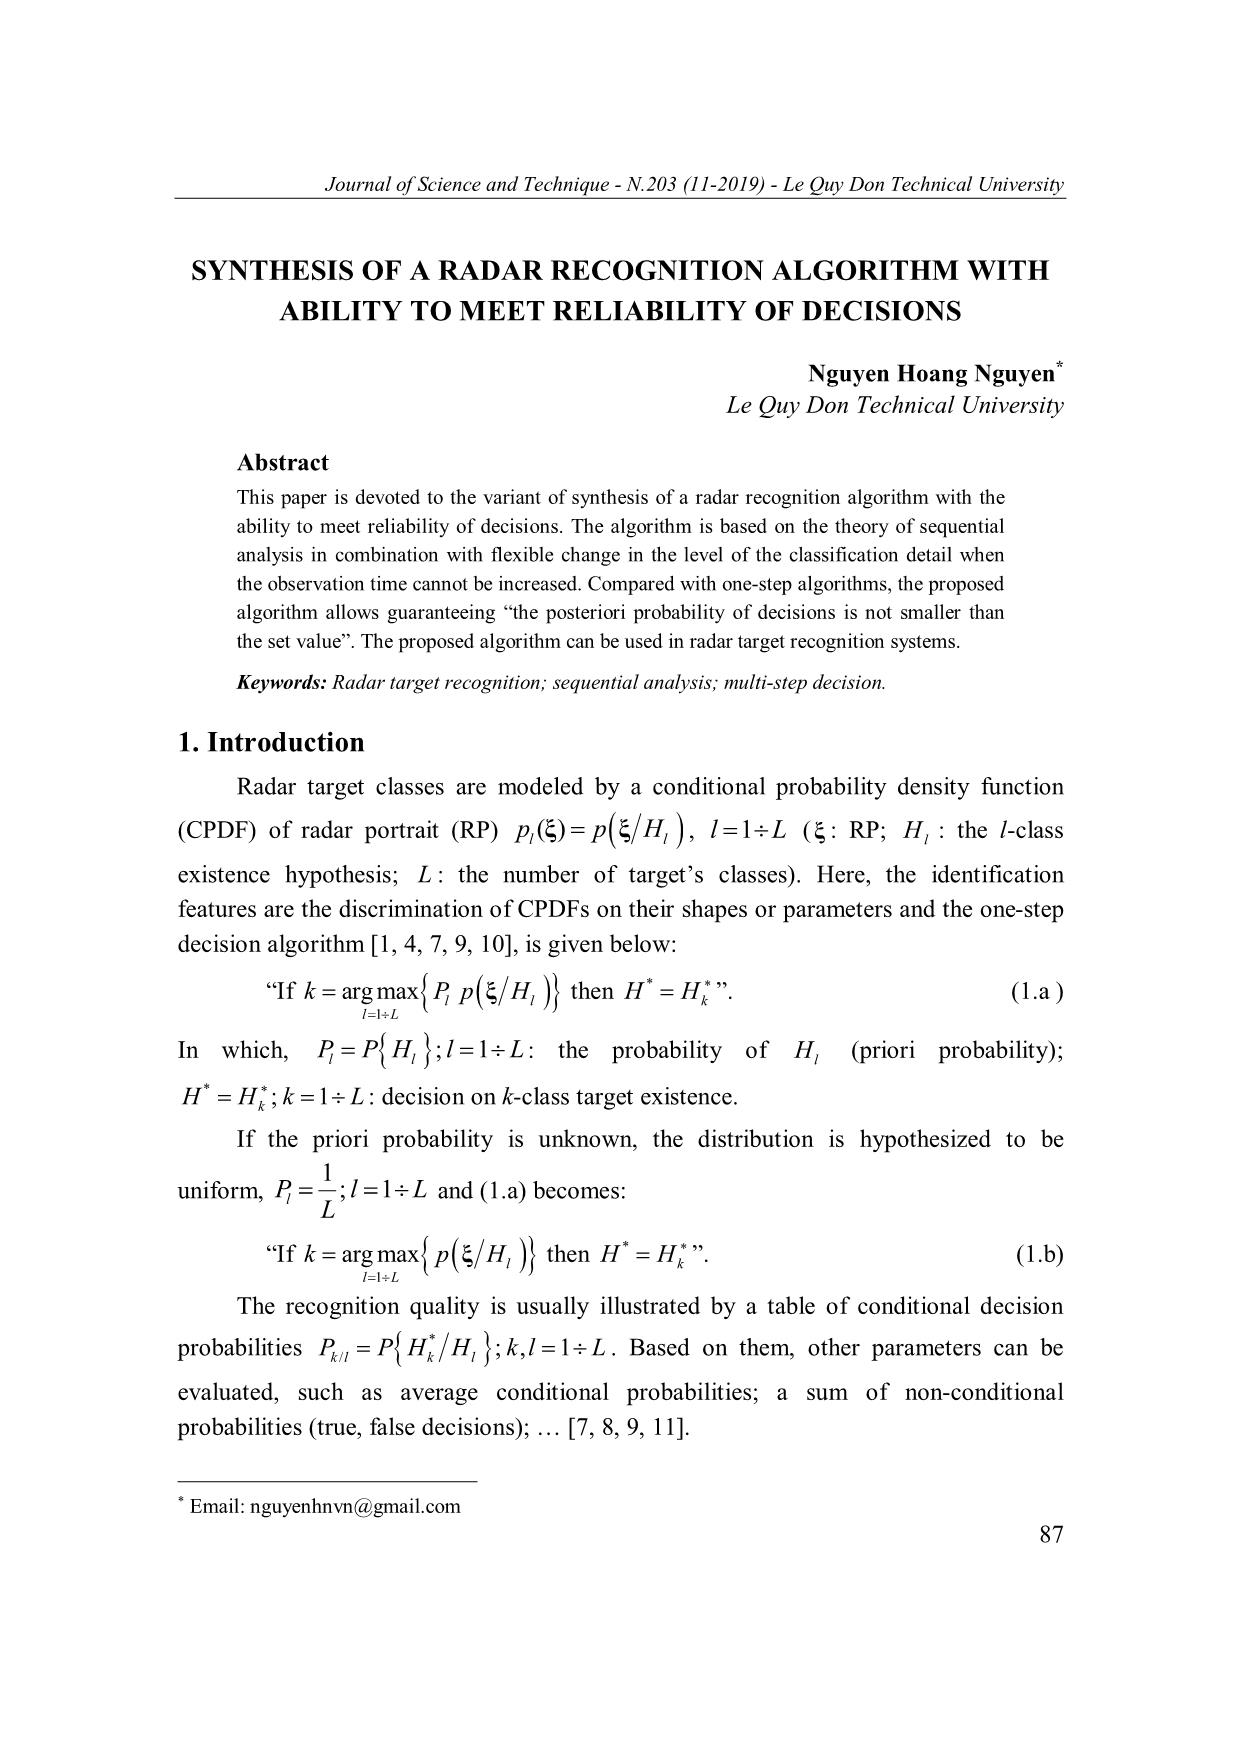 Synthesis of a radar recognition algorithm with ability to meet reliability of decisions trang 1